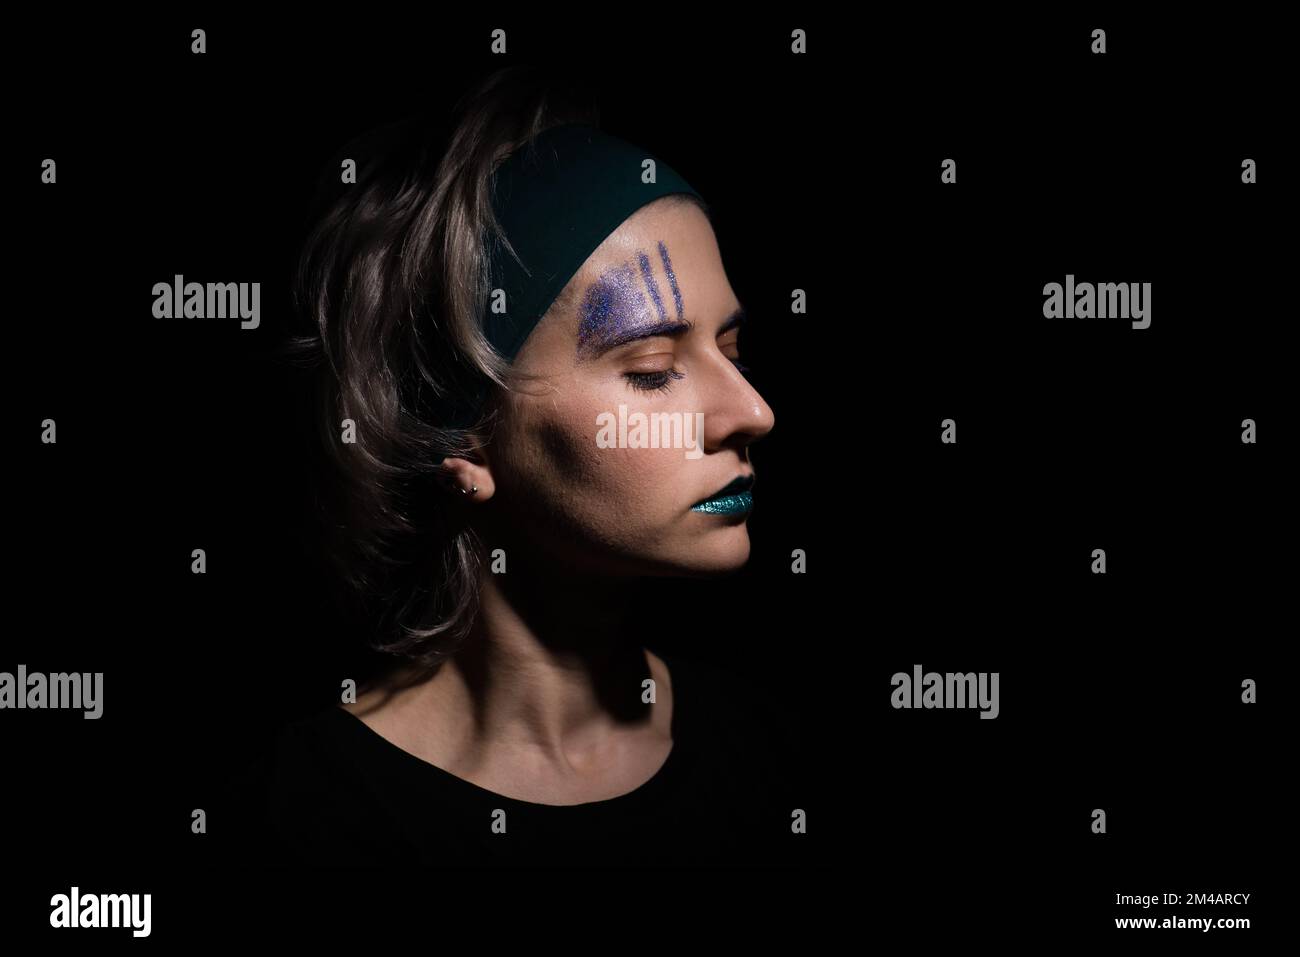 dark dramatic female portrait with trendy teal color lipstic. blond hair woman looking down, mysterious portrait of woman on dark background Stock Photo